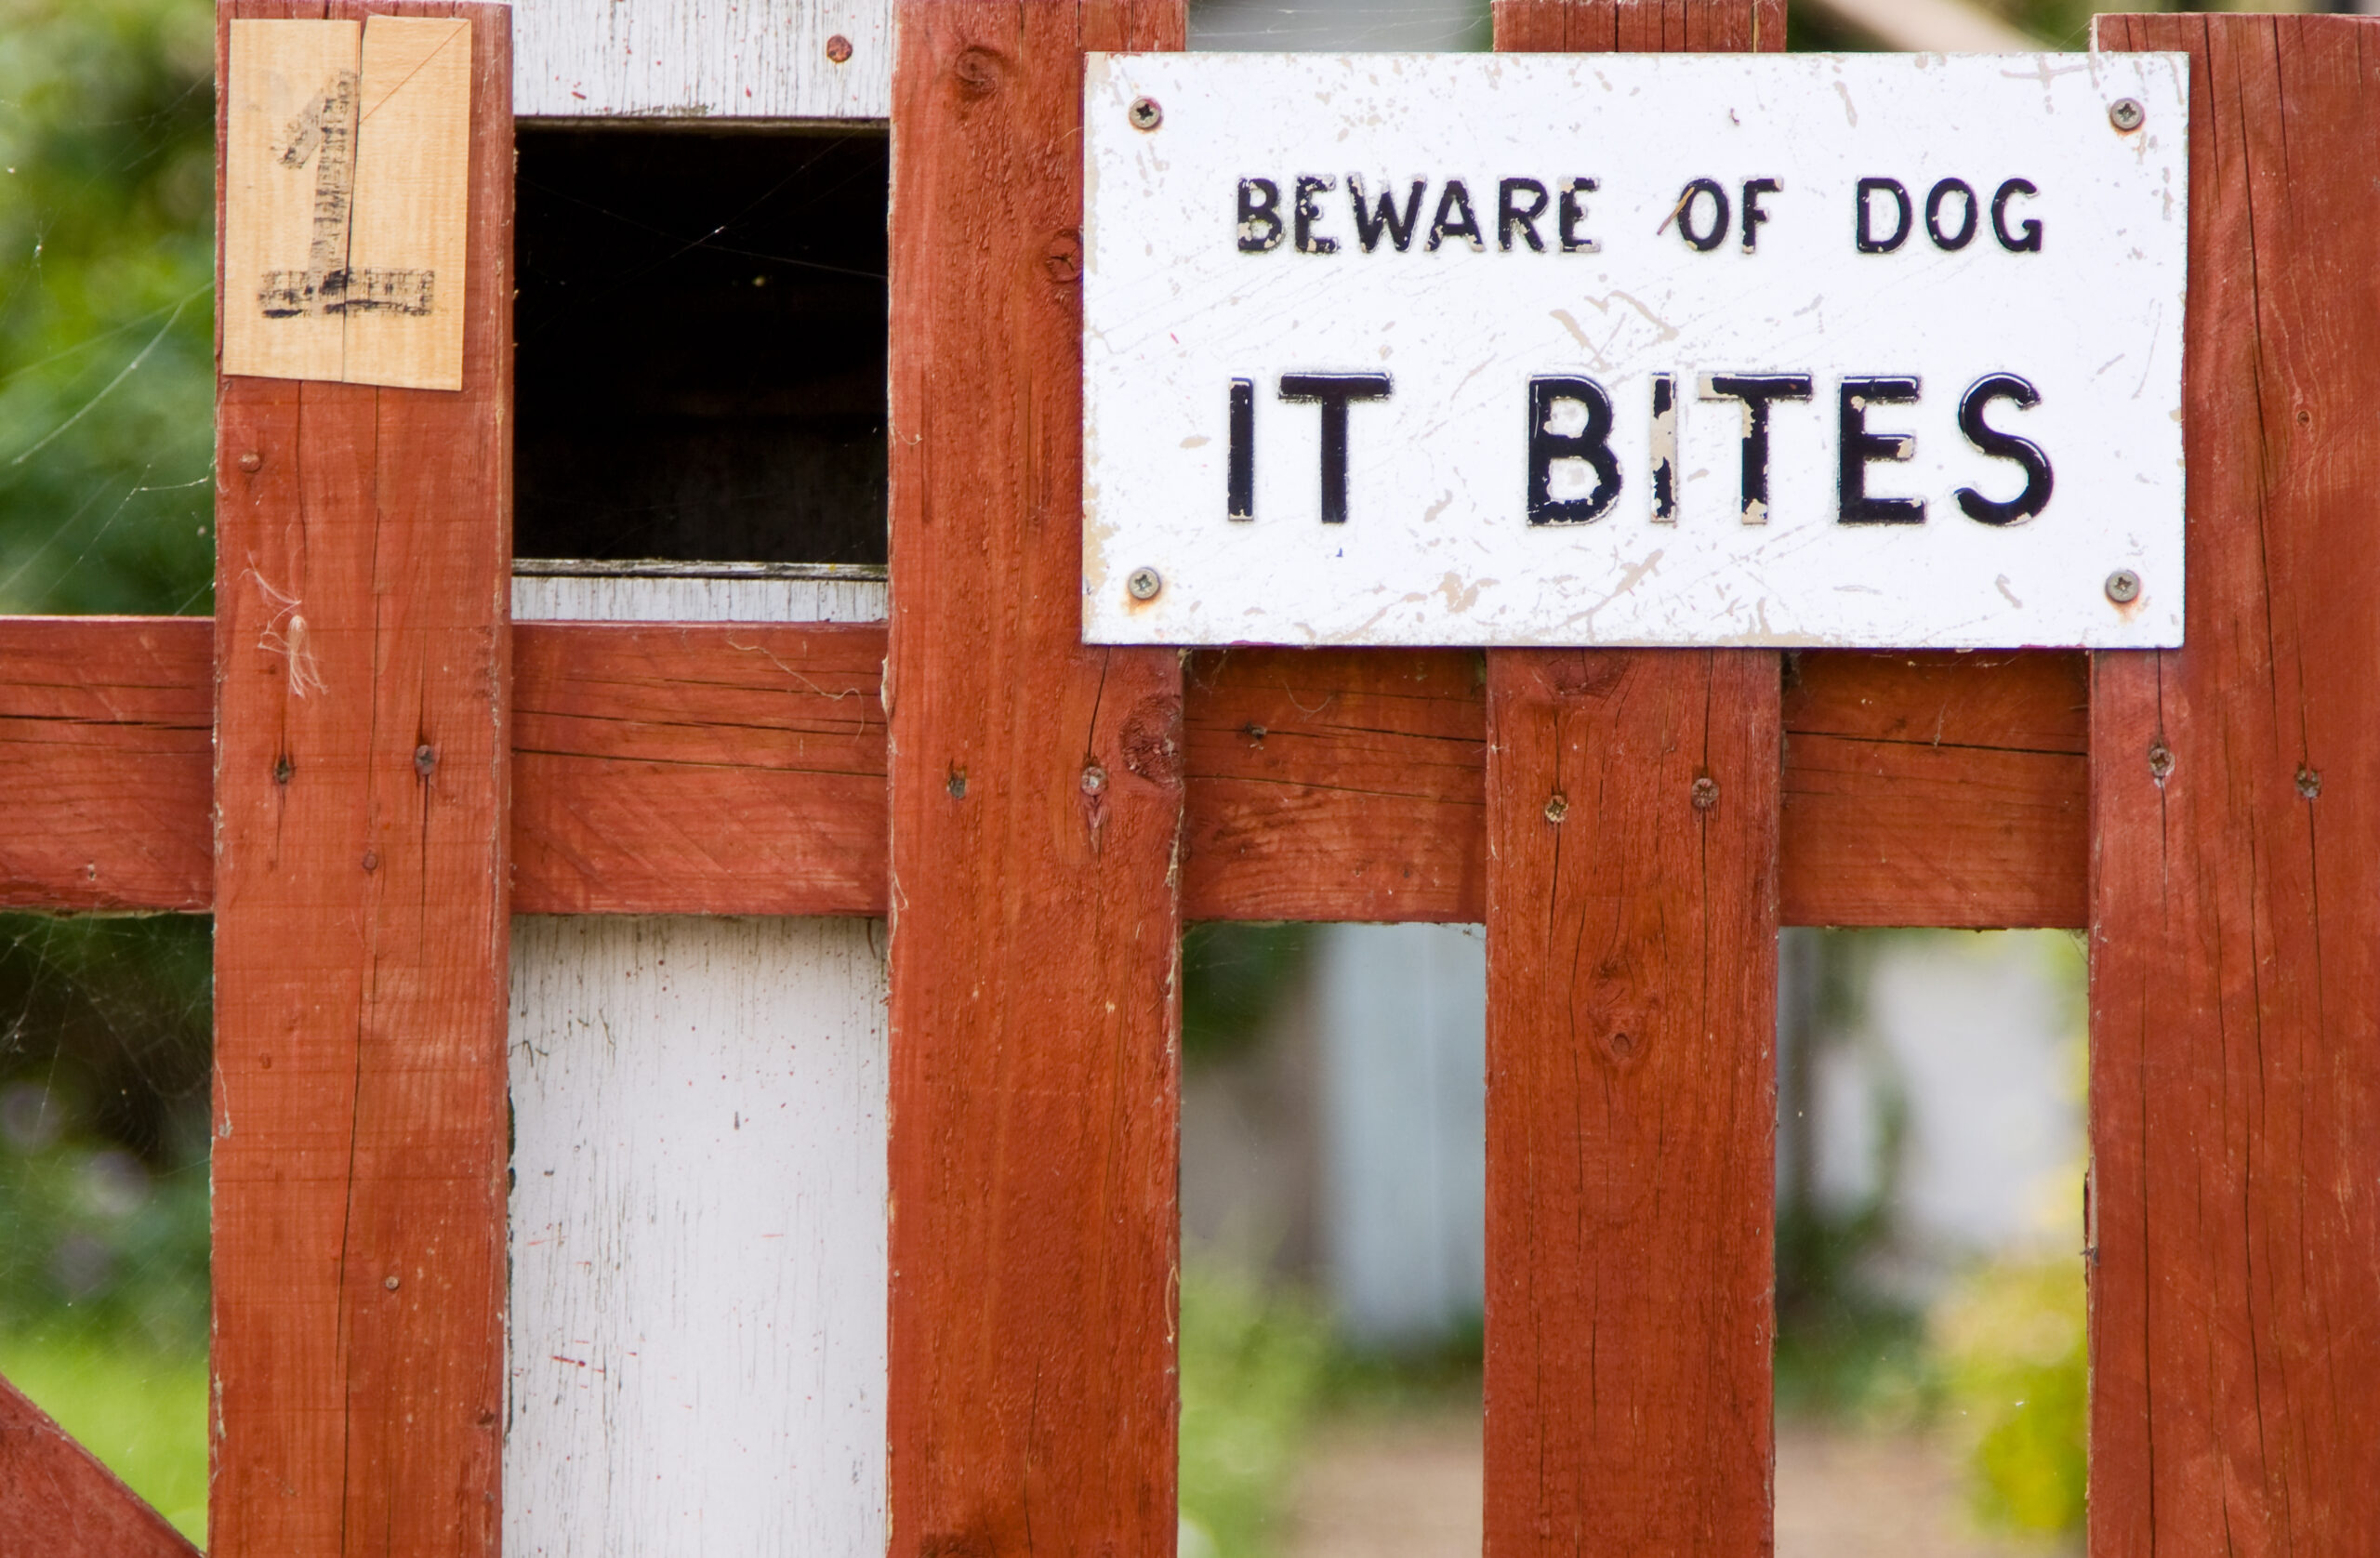 A "beware of dog" sign outside of a house.